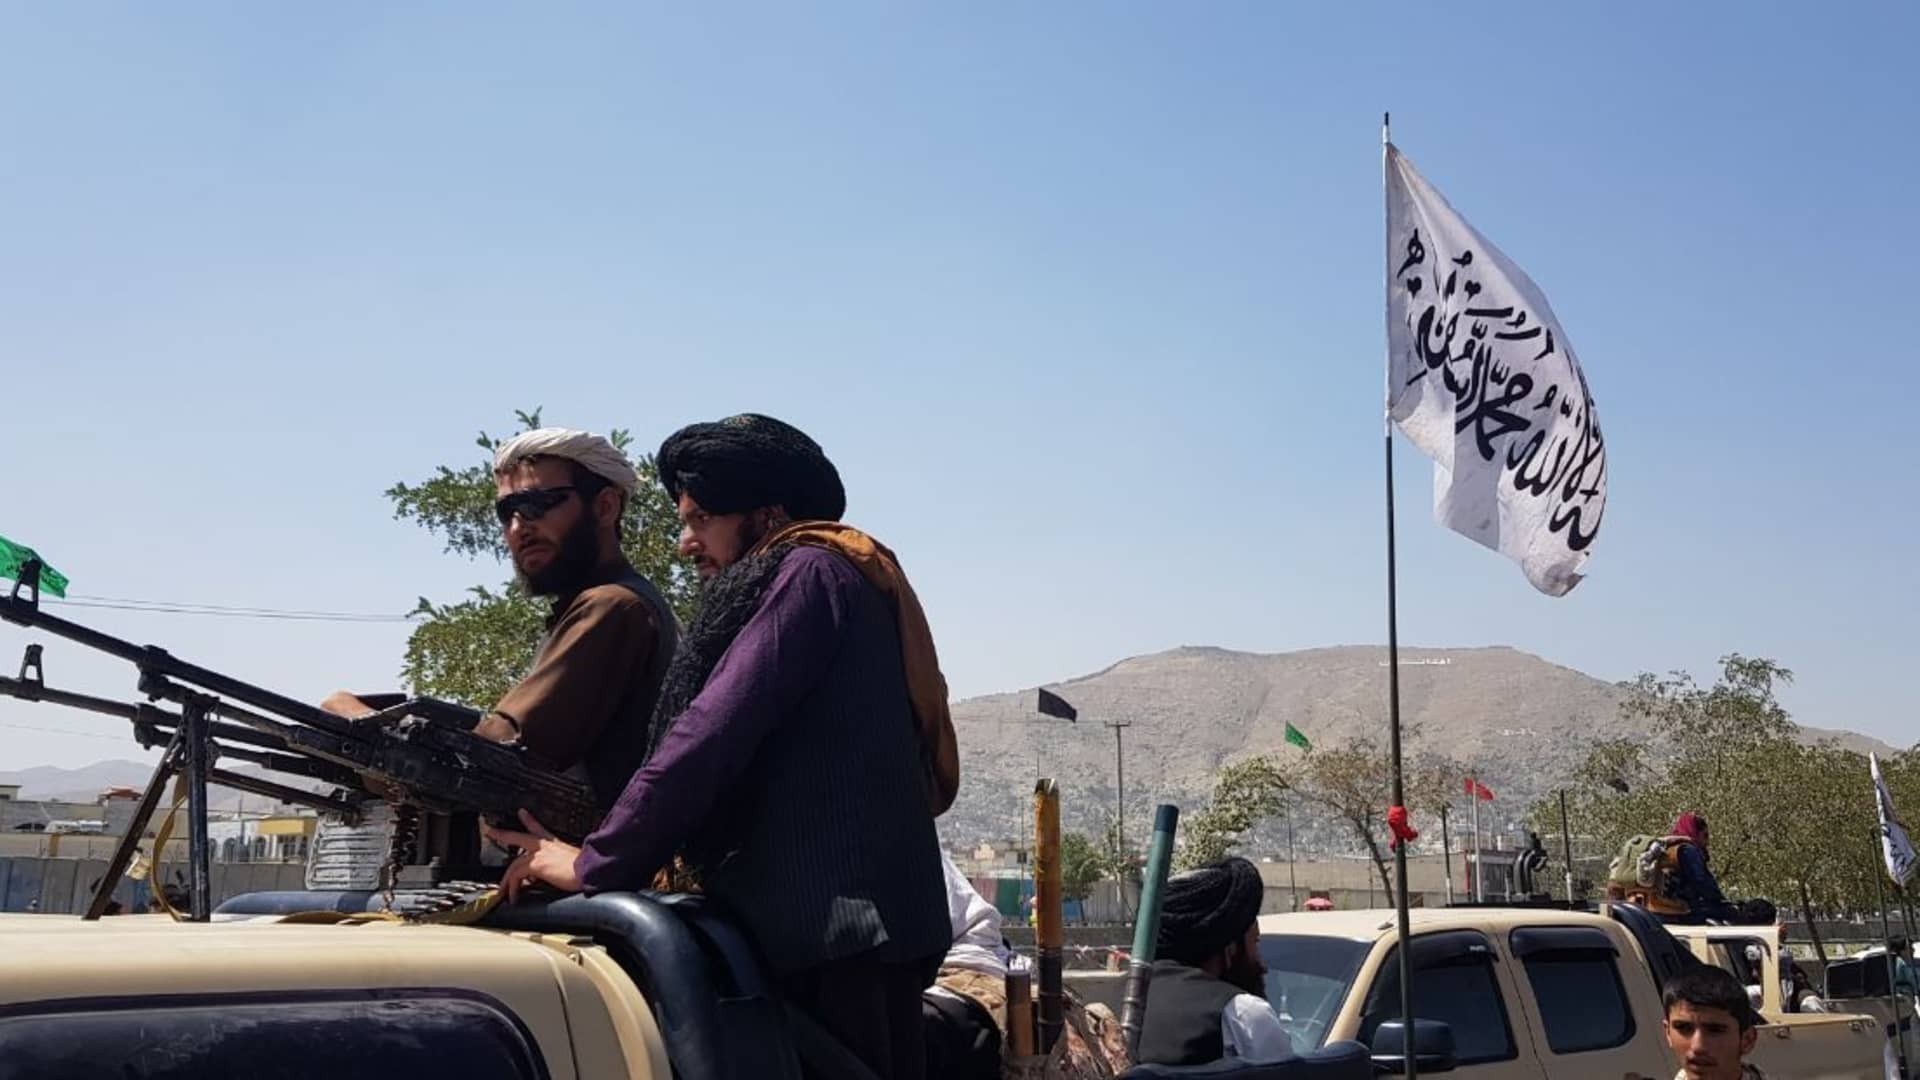 Taliban members patrol the streets of Afghan capital Kabul on August 16, 2021, as the Taliban takes control of Afghanistan after President Ashraf Ghani fled the country.